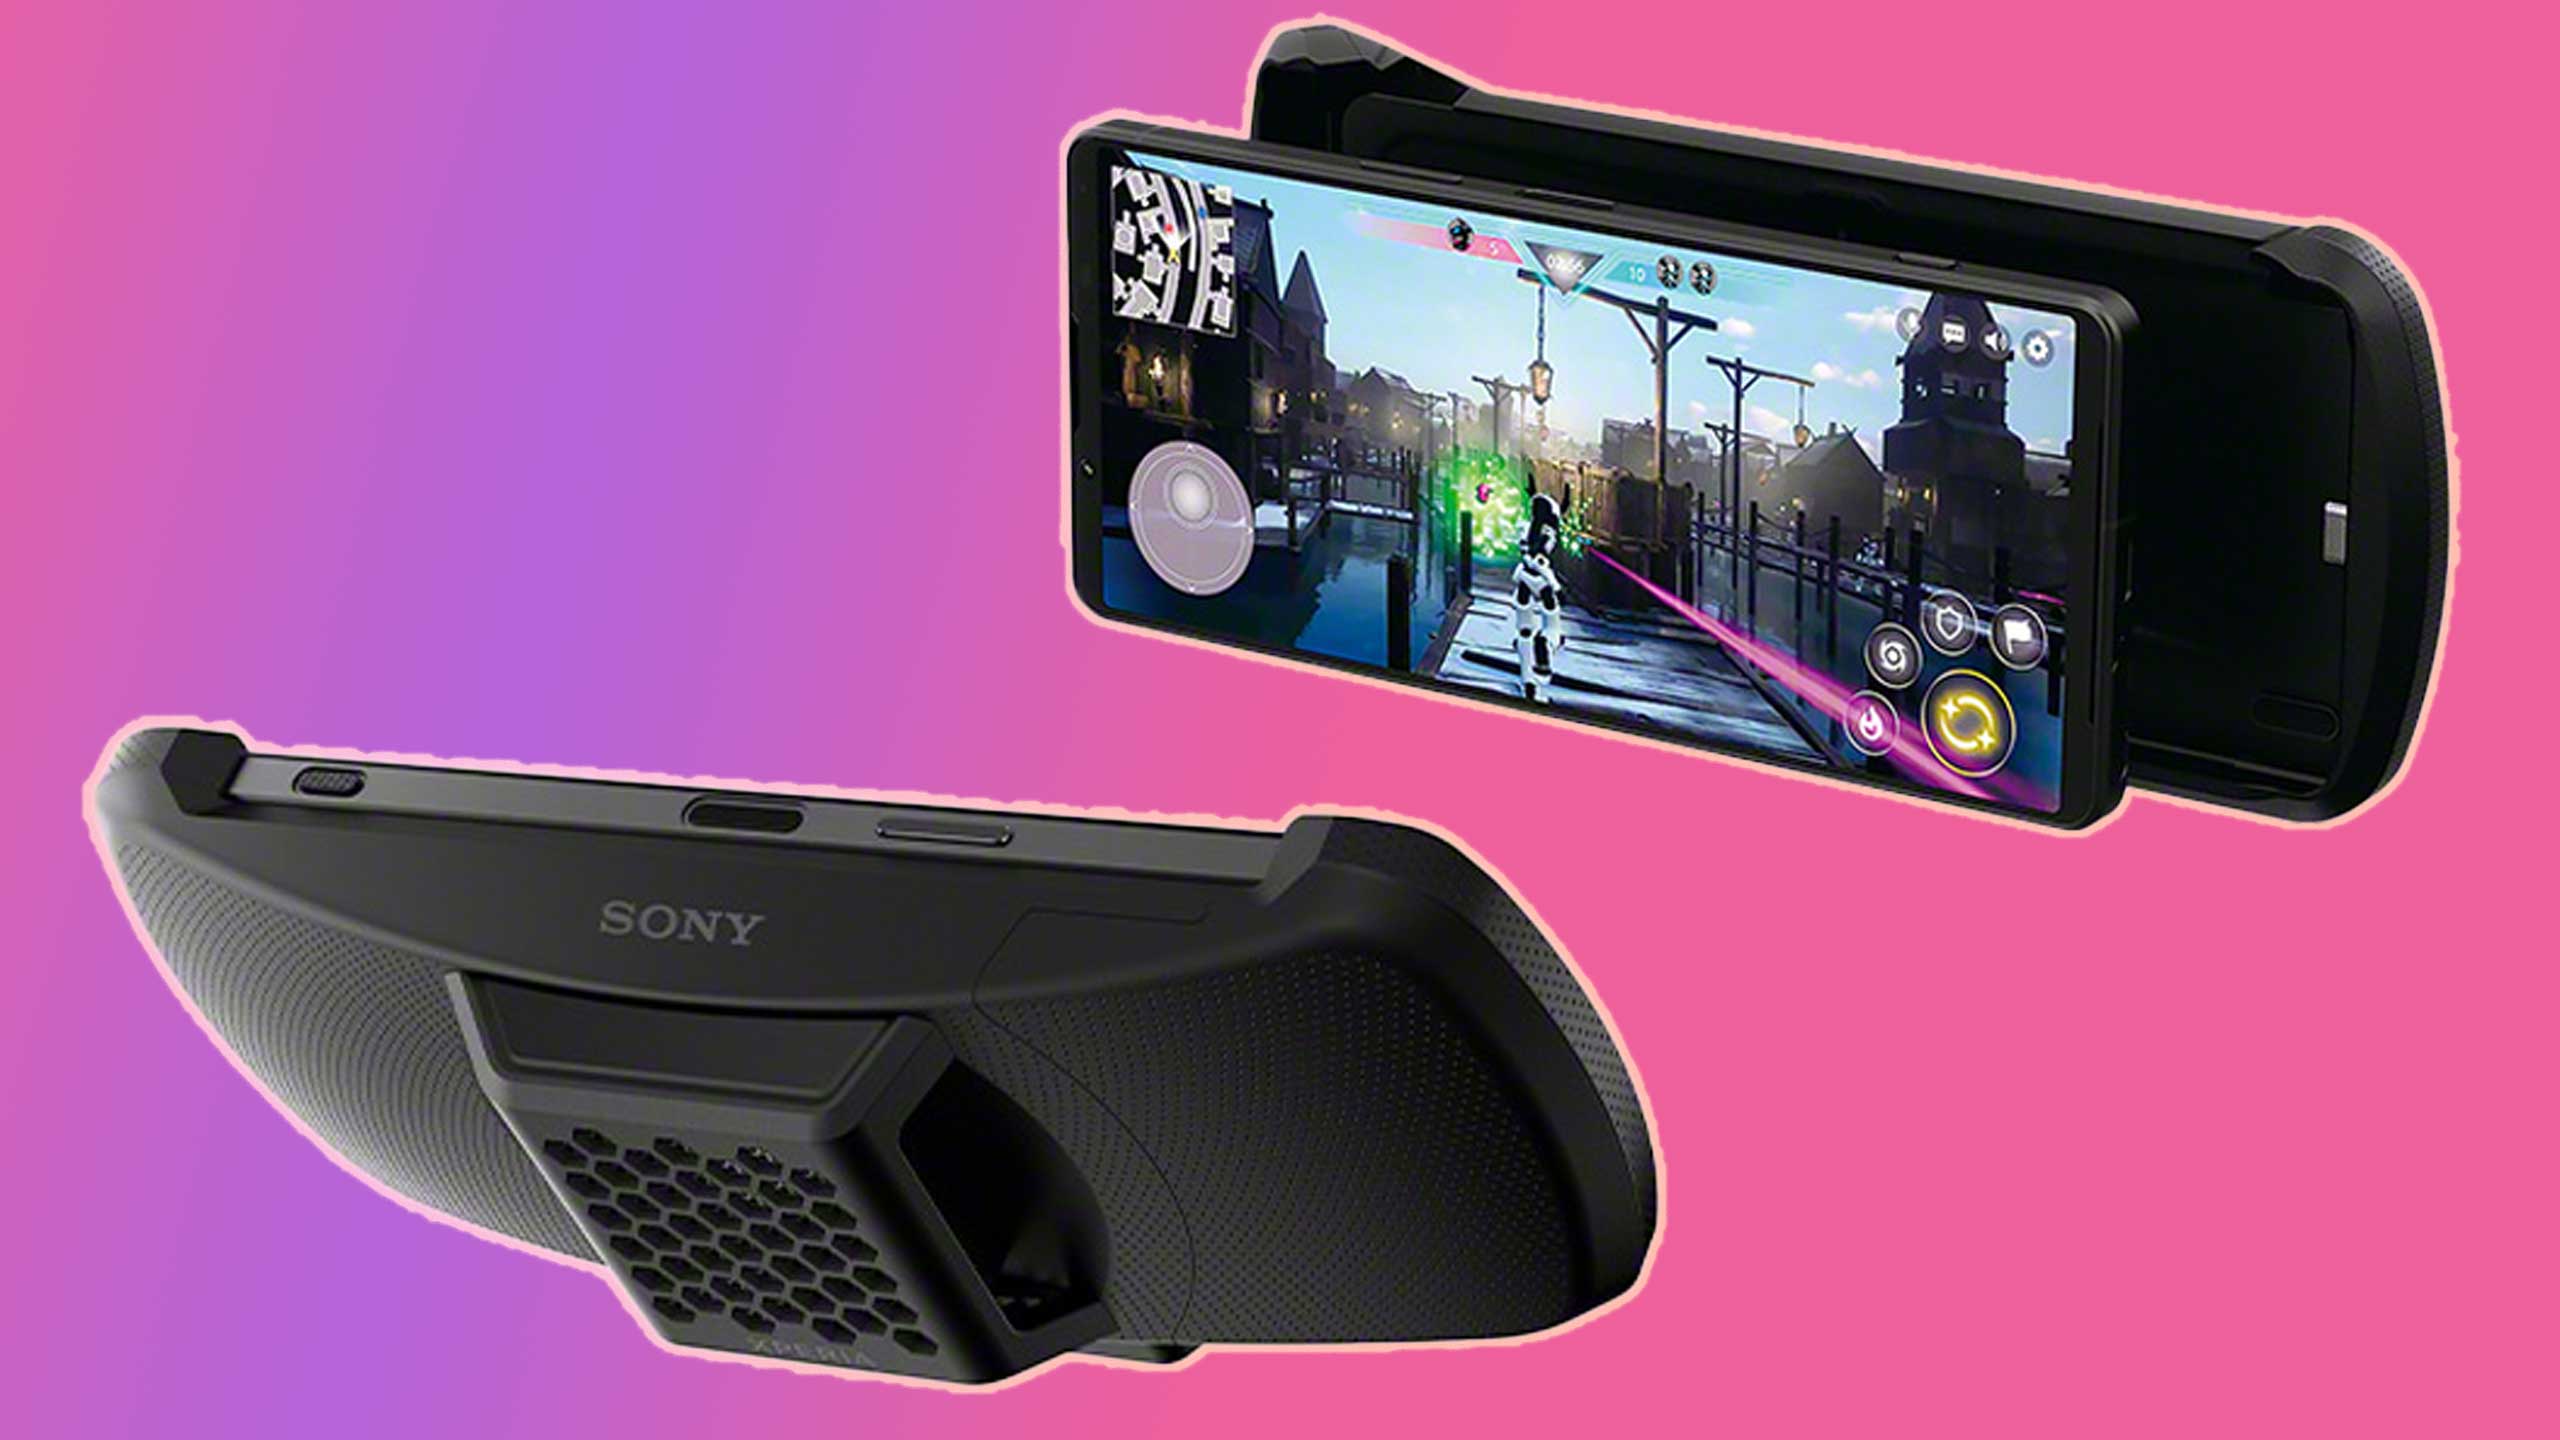 Sony's latest gaming accessory is a smartphone fan that can do a